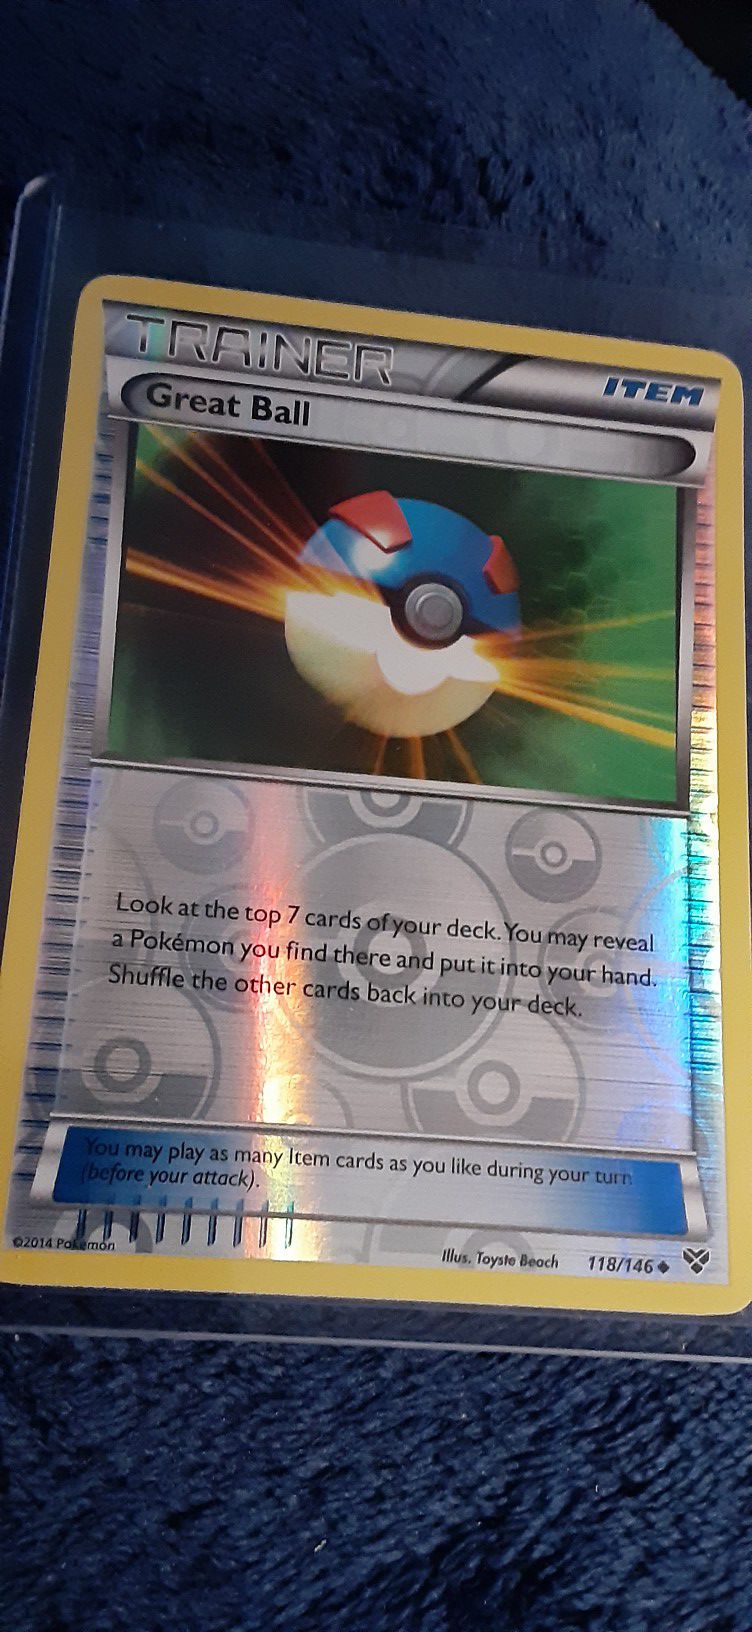 Great Ball Trainer Card Pokemon Holo foil